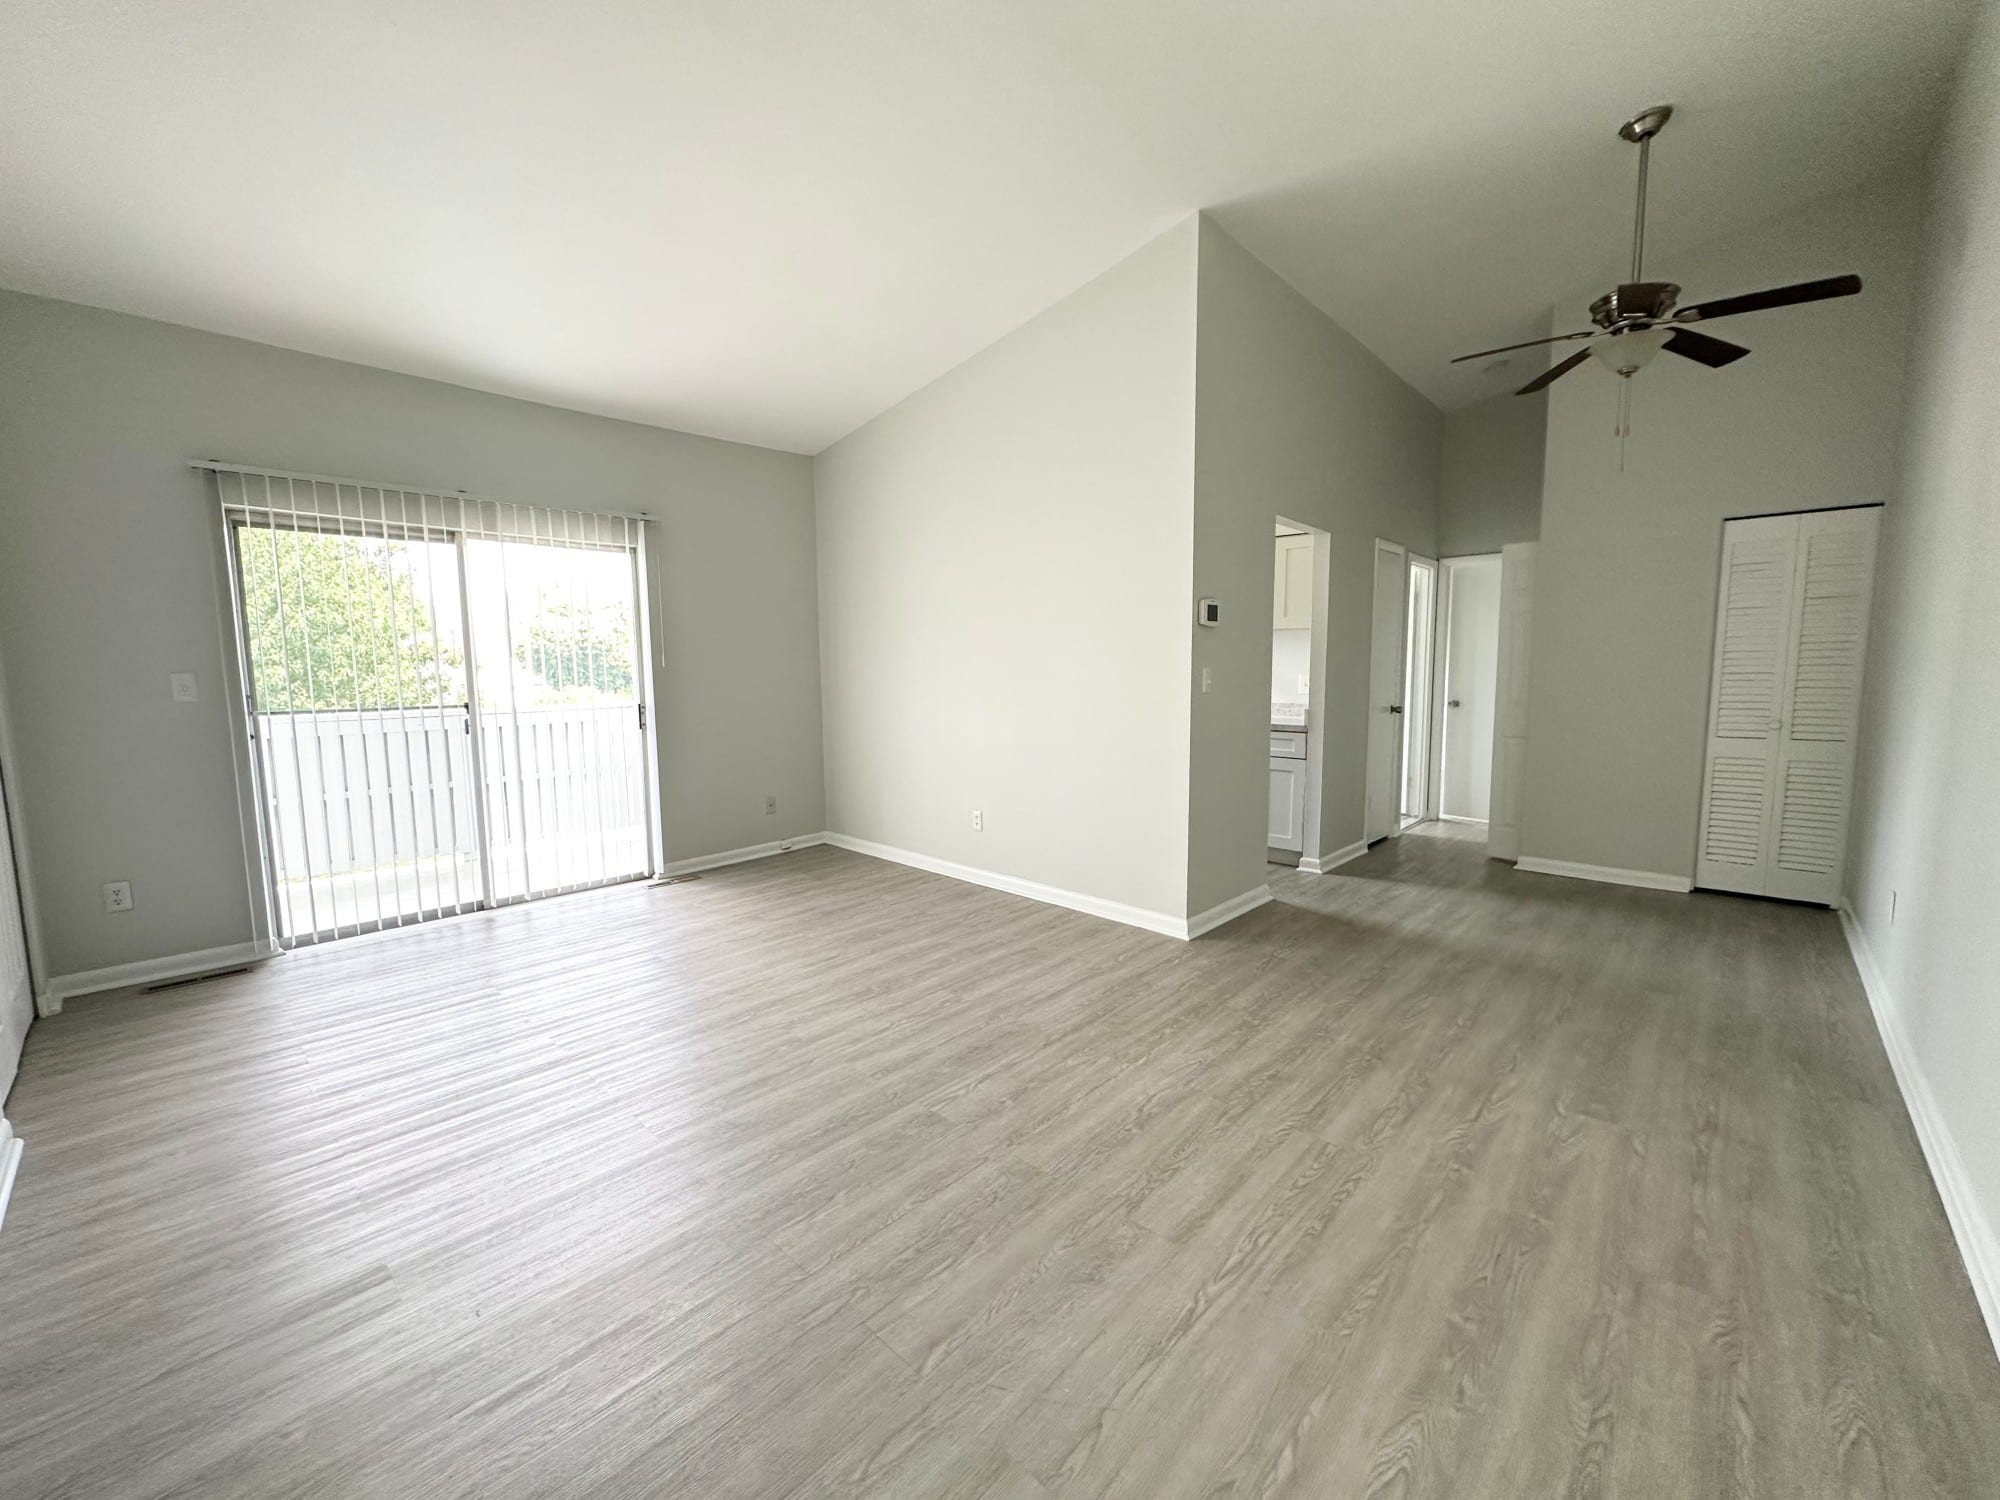 Spacious One Bedroom Apartment at Hazelwood Apts *Reserve Now* -  apts/housing for rent - apartment rent - craigslist